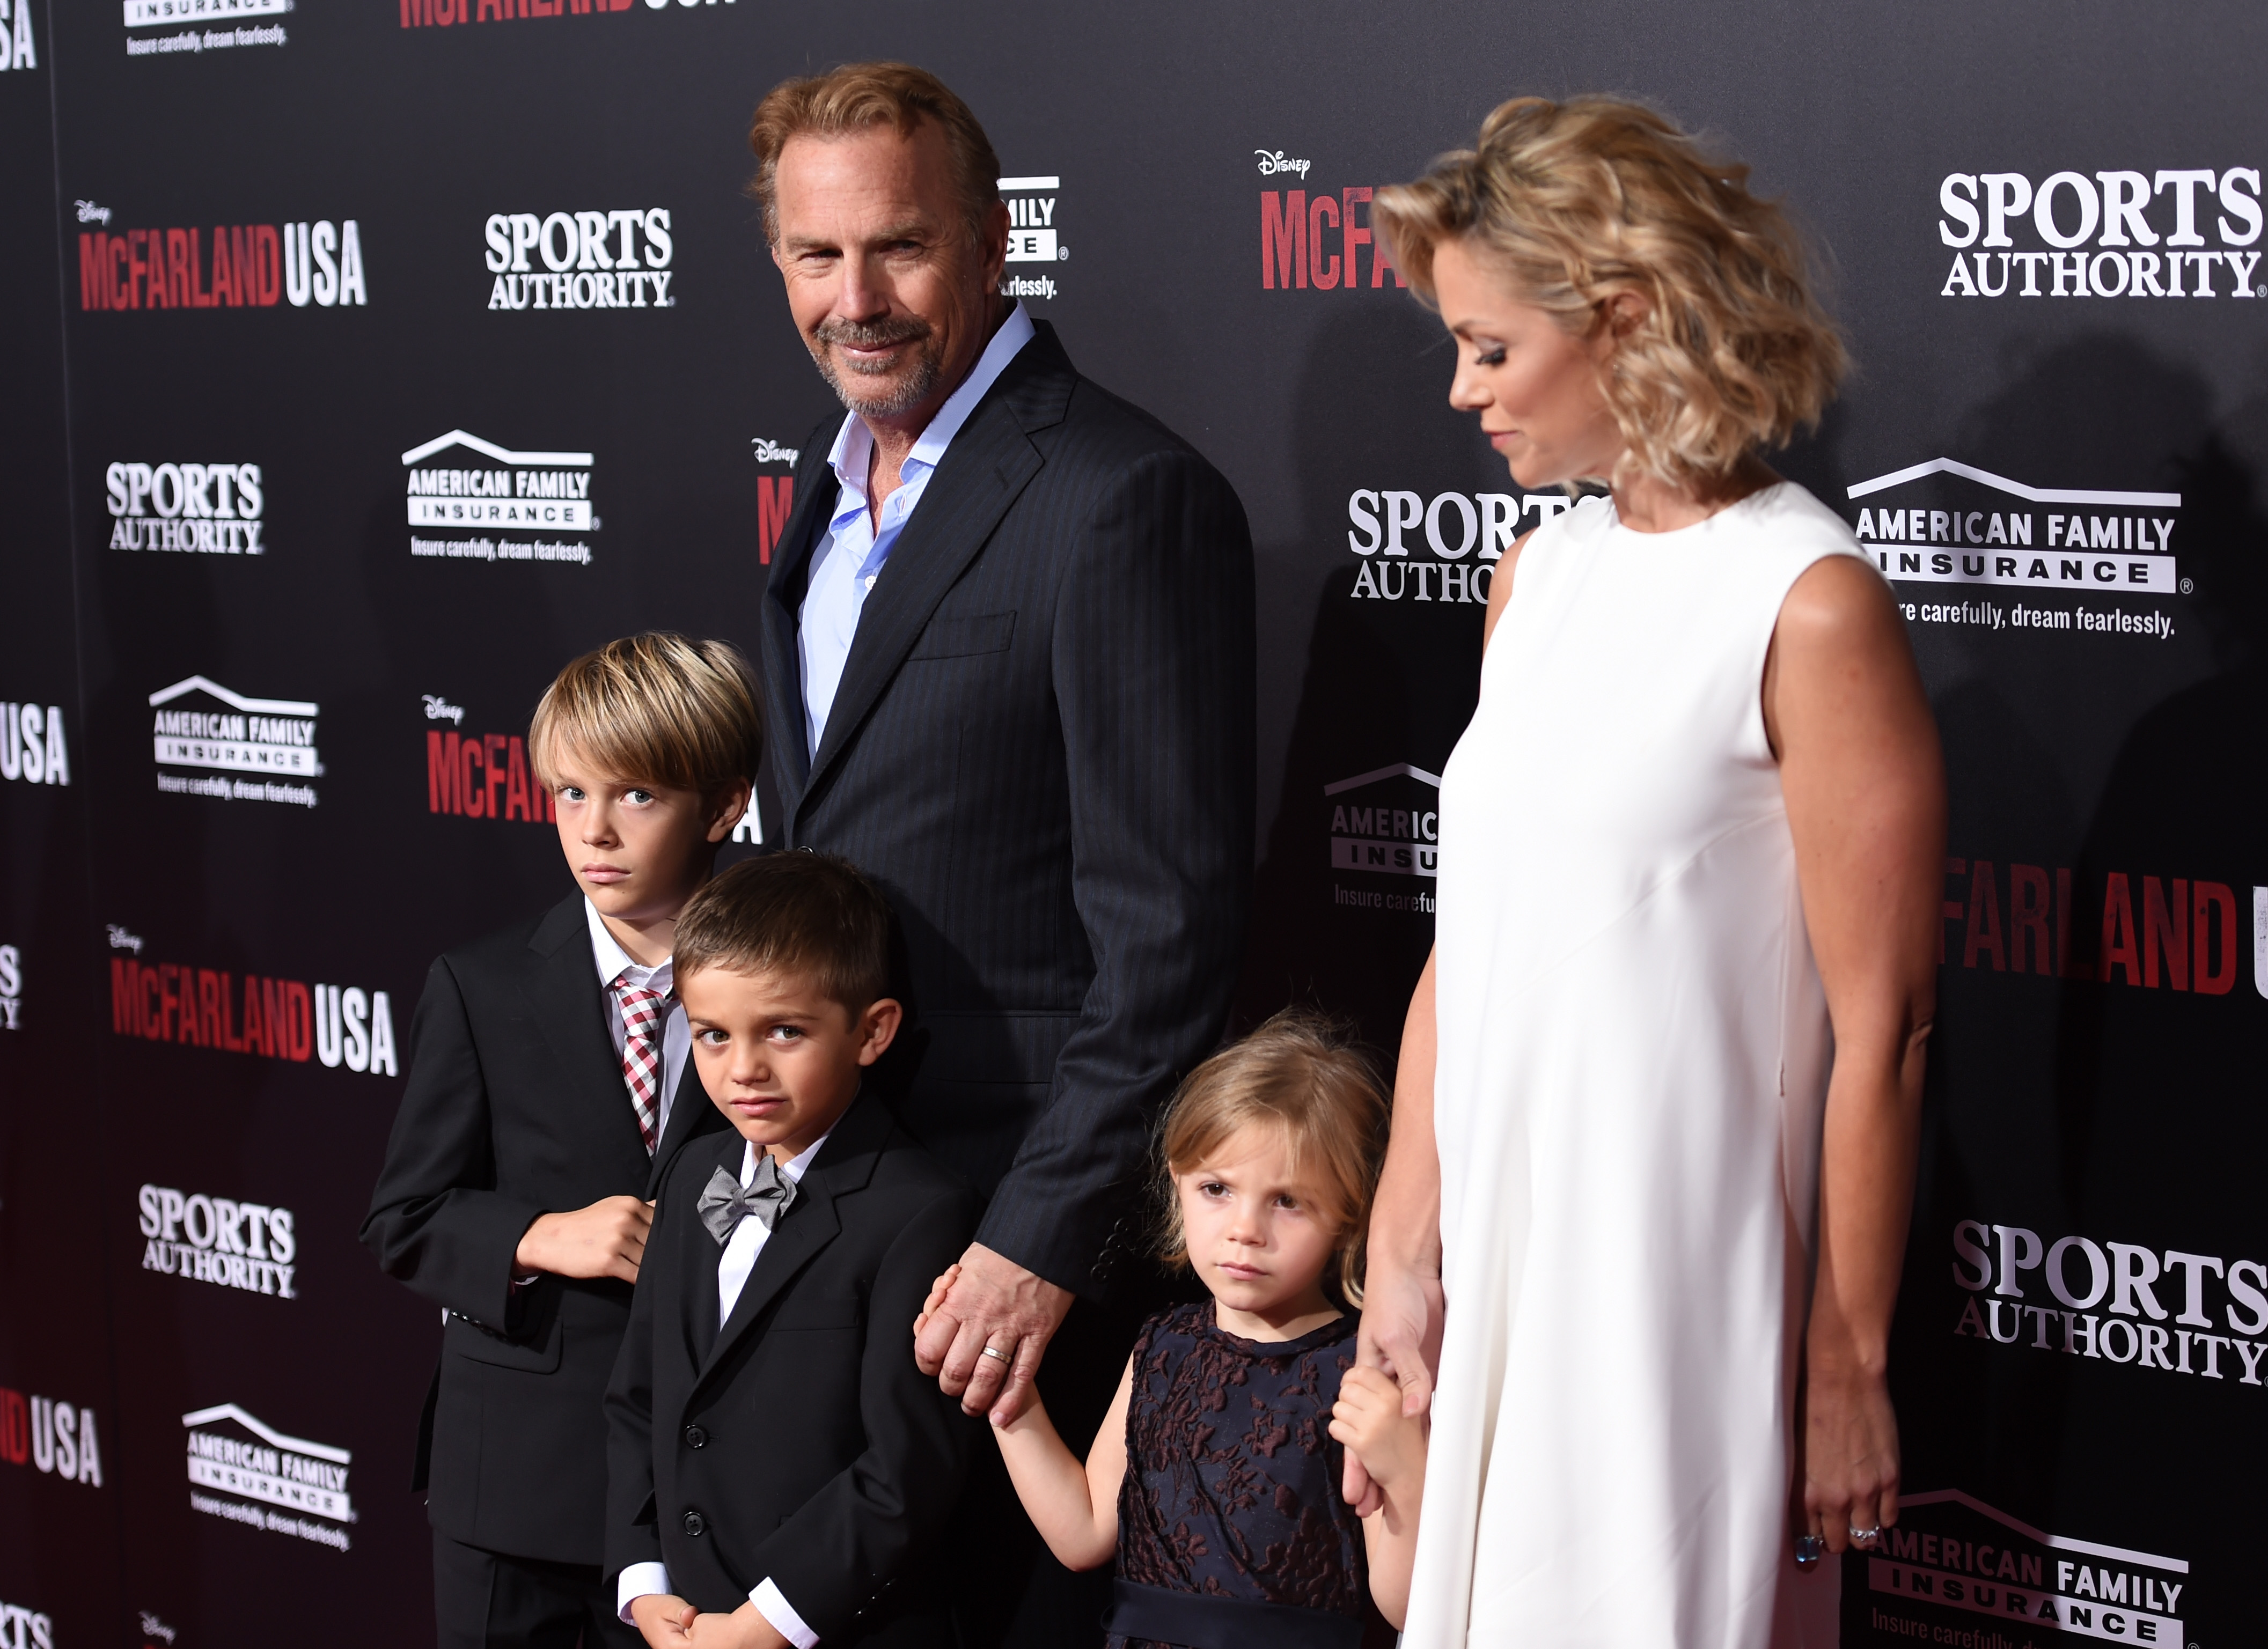 Kevin Costner, his wife Christine Baumgartner, and their children at the world premiere of "McFarland, USA" on February 9, 2015, in Hollywood, California | Source: Getty Images